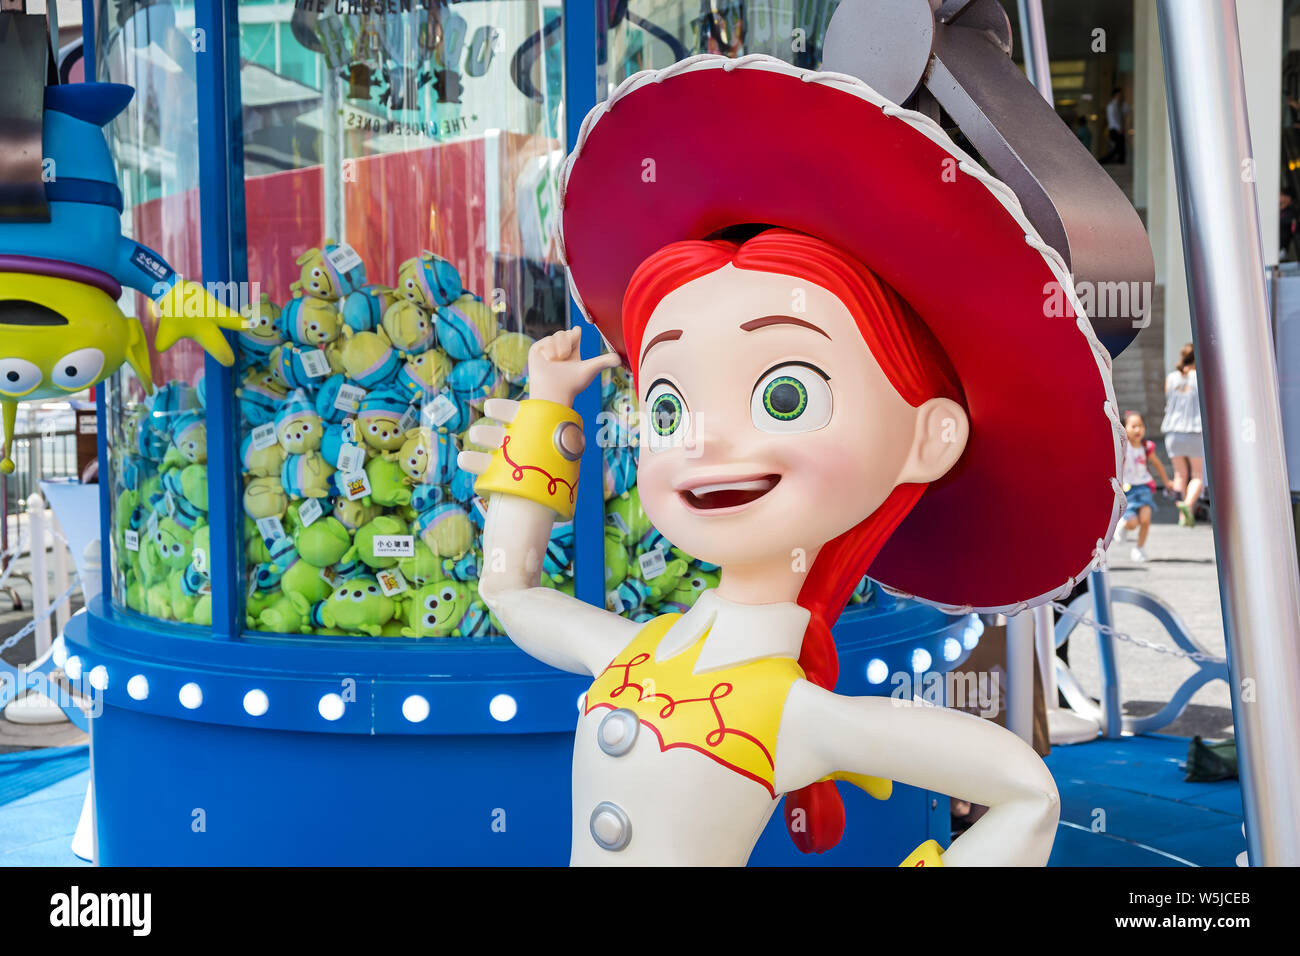 Hong Kong -July 26, 2019: Hong Kong Harbour Cityis joining forces with Disney to bring “Toy Story 4” themed carnival with different games and challeng Stock Photo